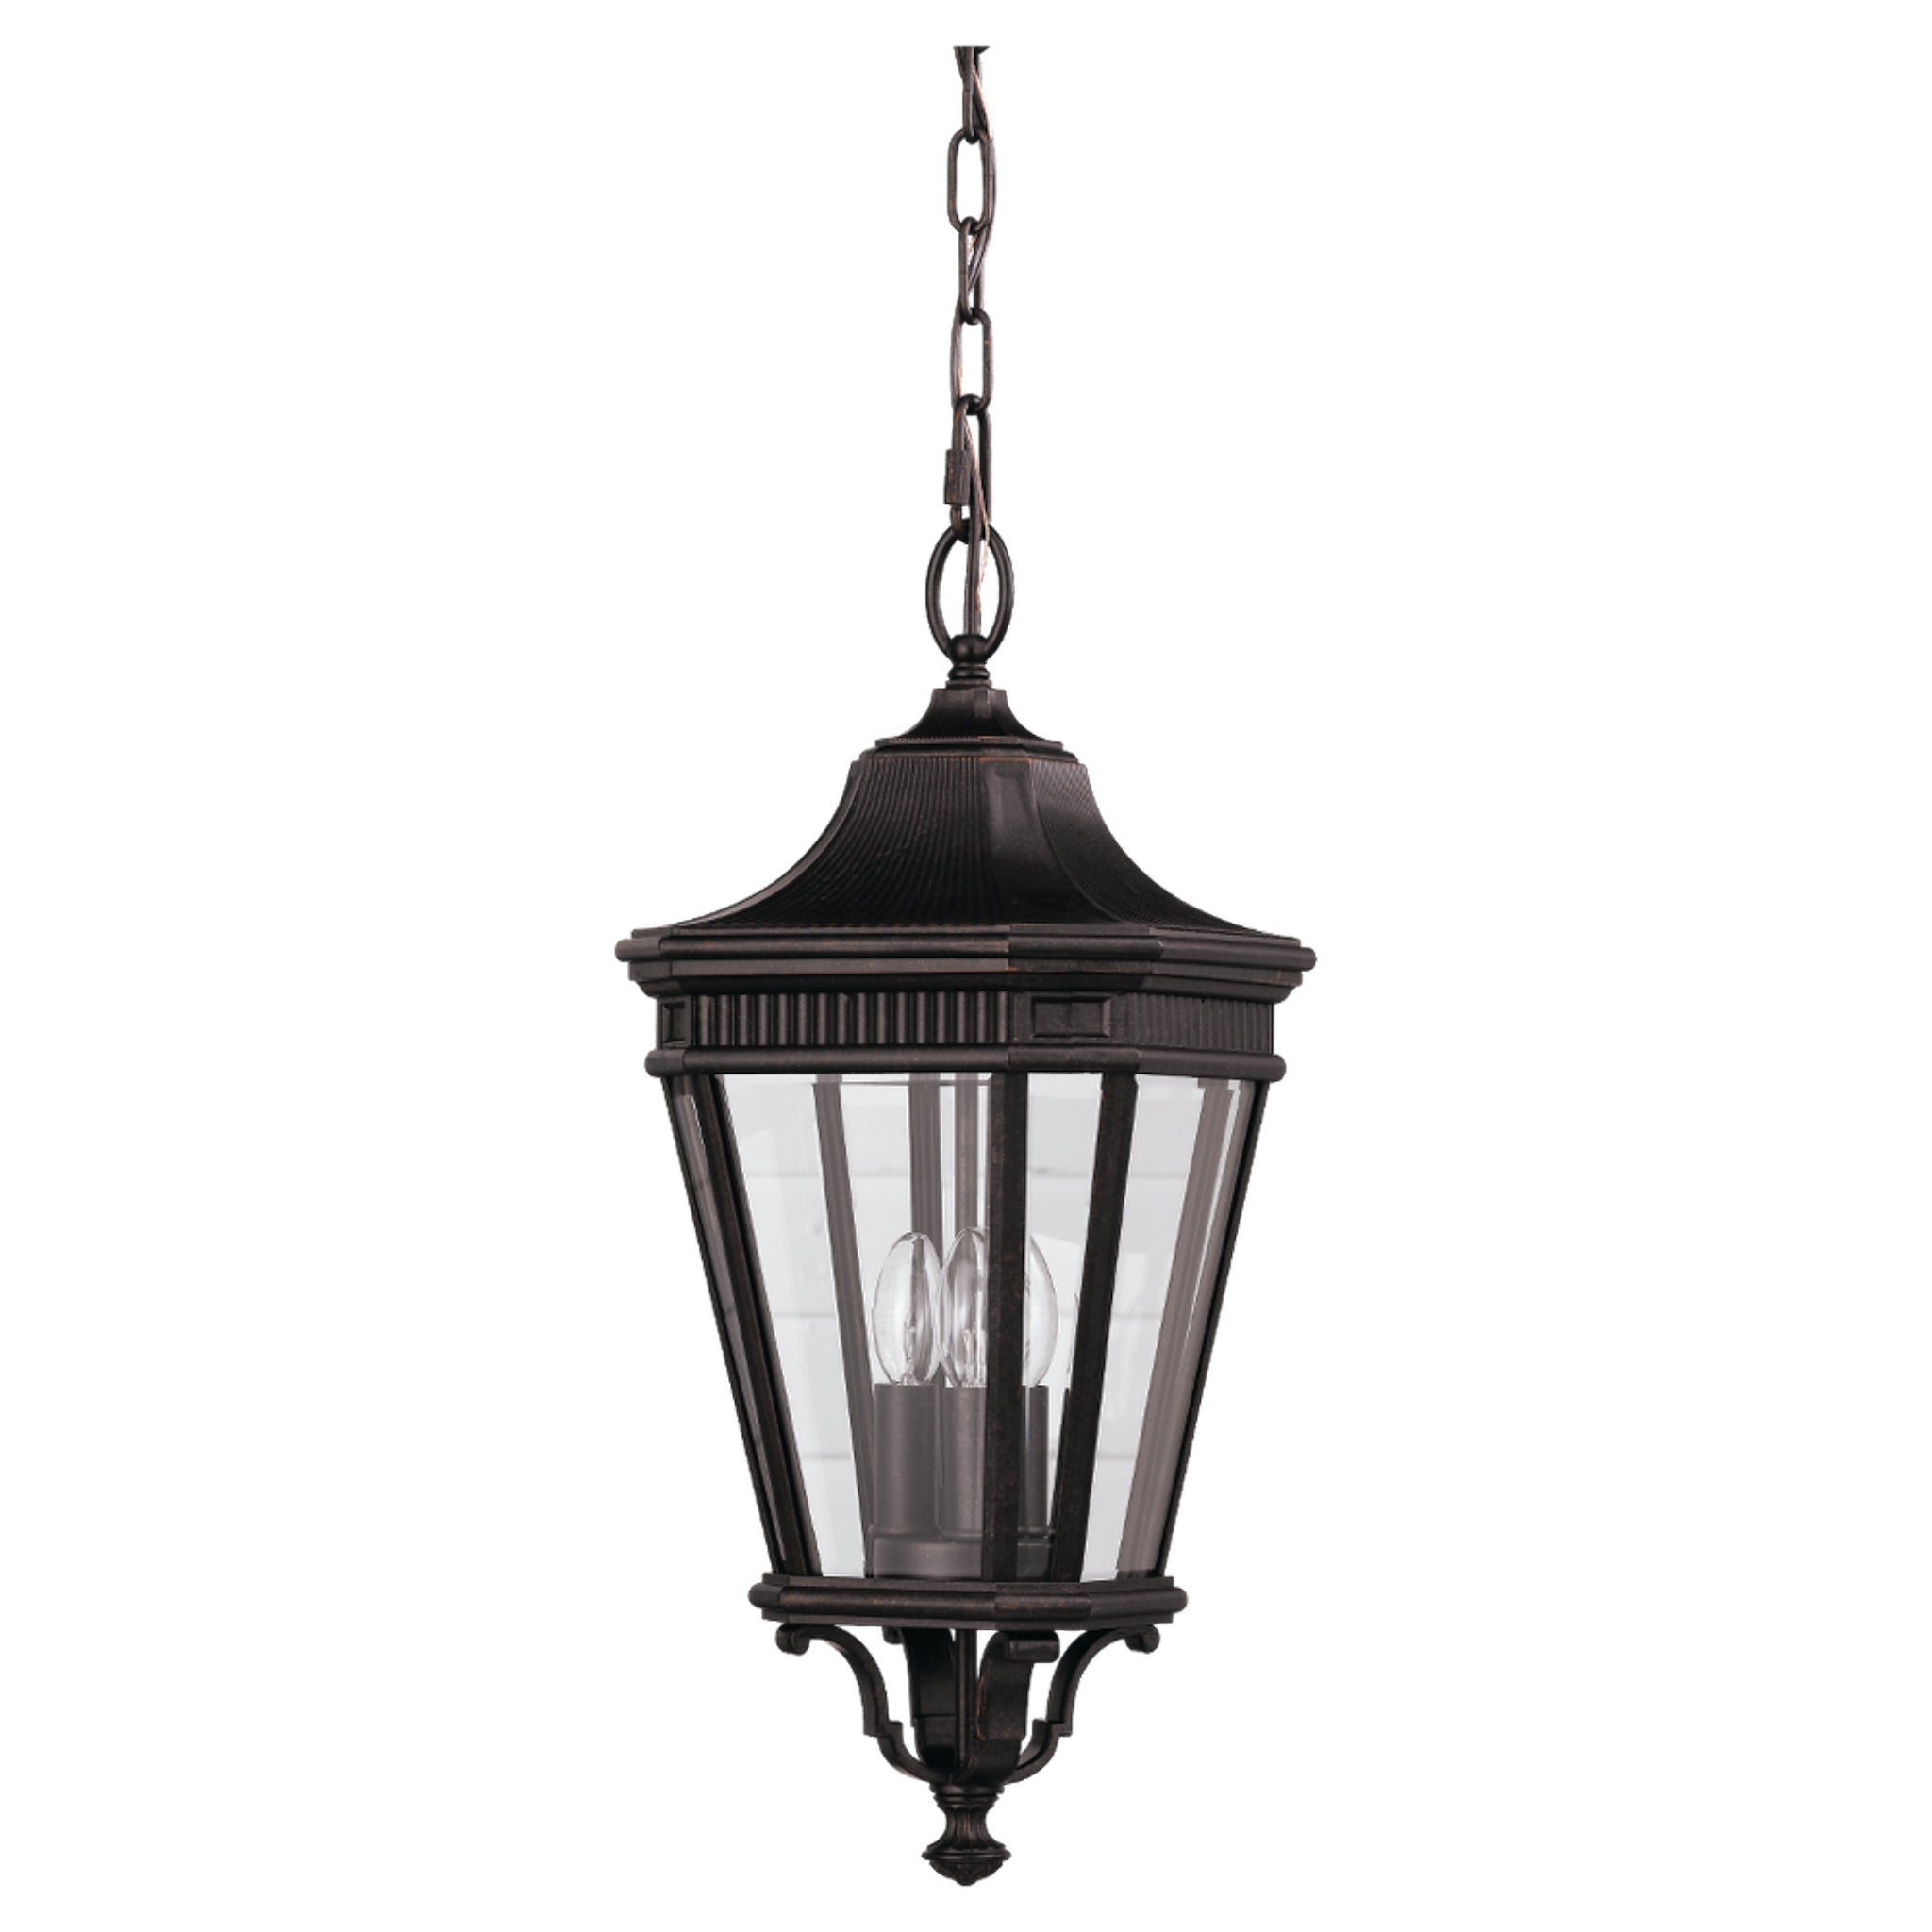 Cotswold Lane Small Pendant Traditional Outdoor Fixture 9.5" Width 21.5" Height Aluminum Irregular Clear Beveled Shade in Grecian Bronze